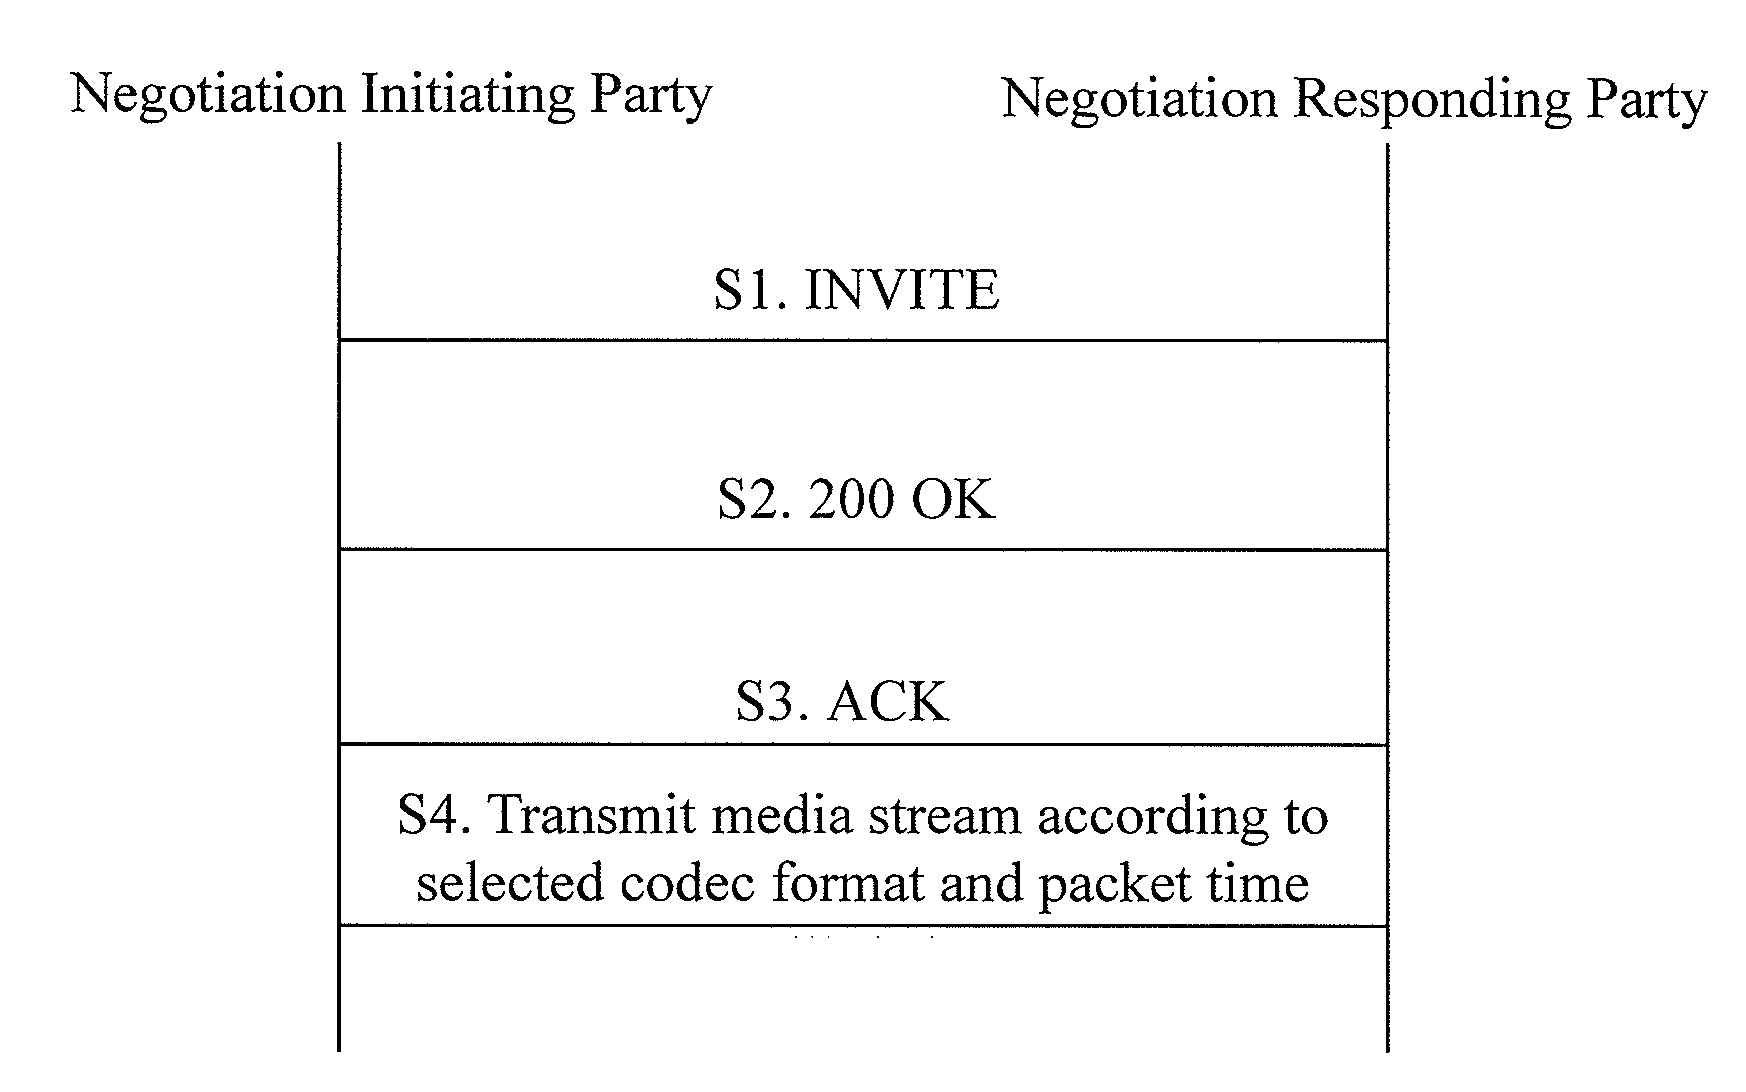 Method for negotiating about the media stream packet time length